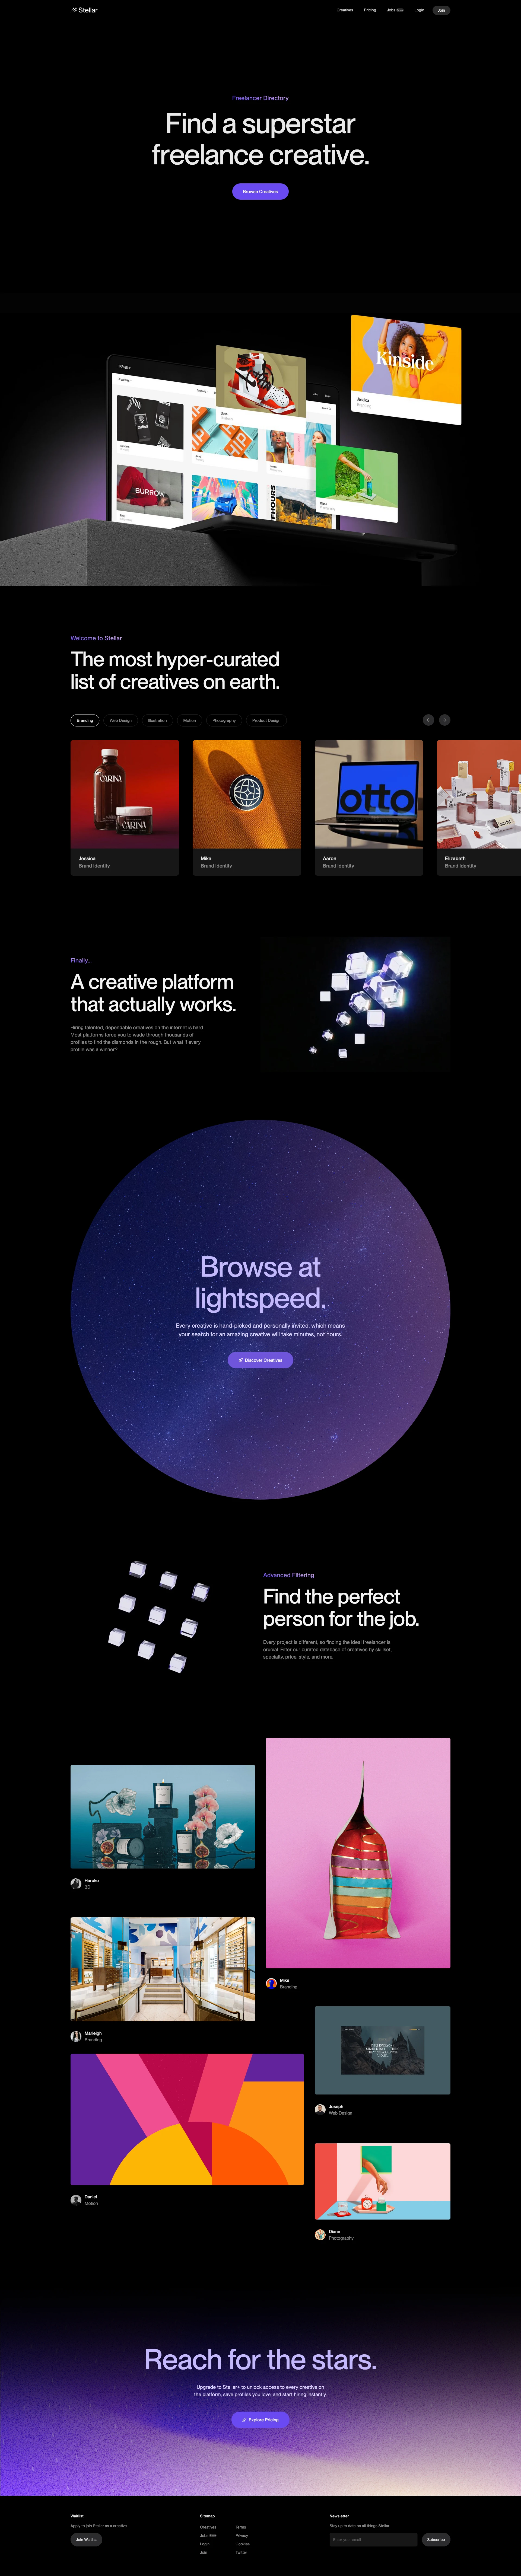 Stellar Landing Page Example: Stellar is a hyper-curated creative directory that connects brands with the best creatives on earth.